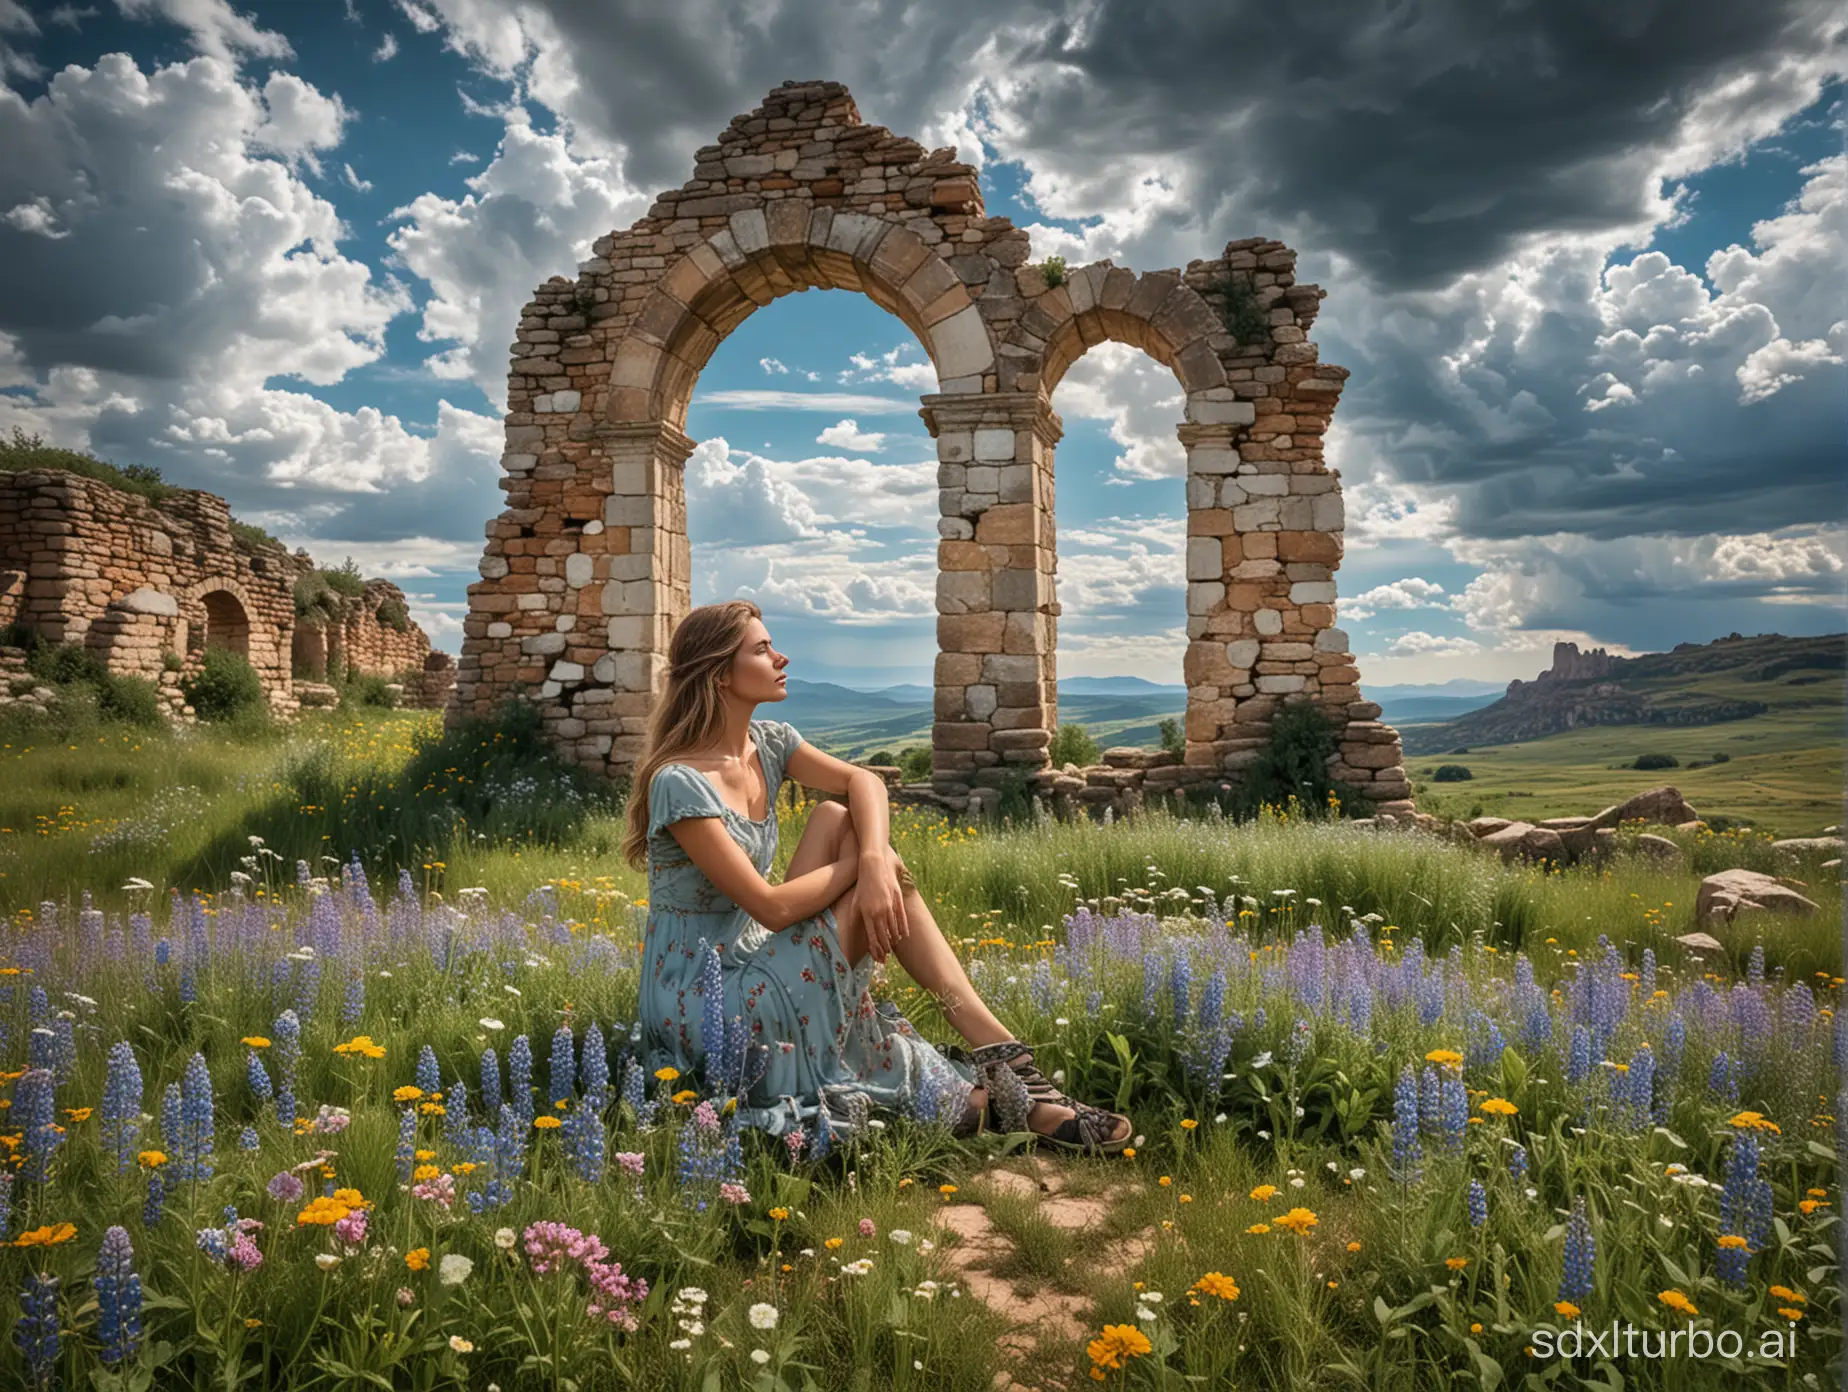 An old ruin surrounded by wildflowers and herbs, majestic cloudscape with a pretty woman sitting in the glass.